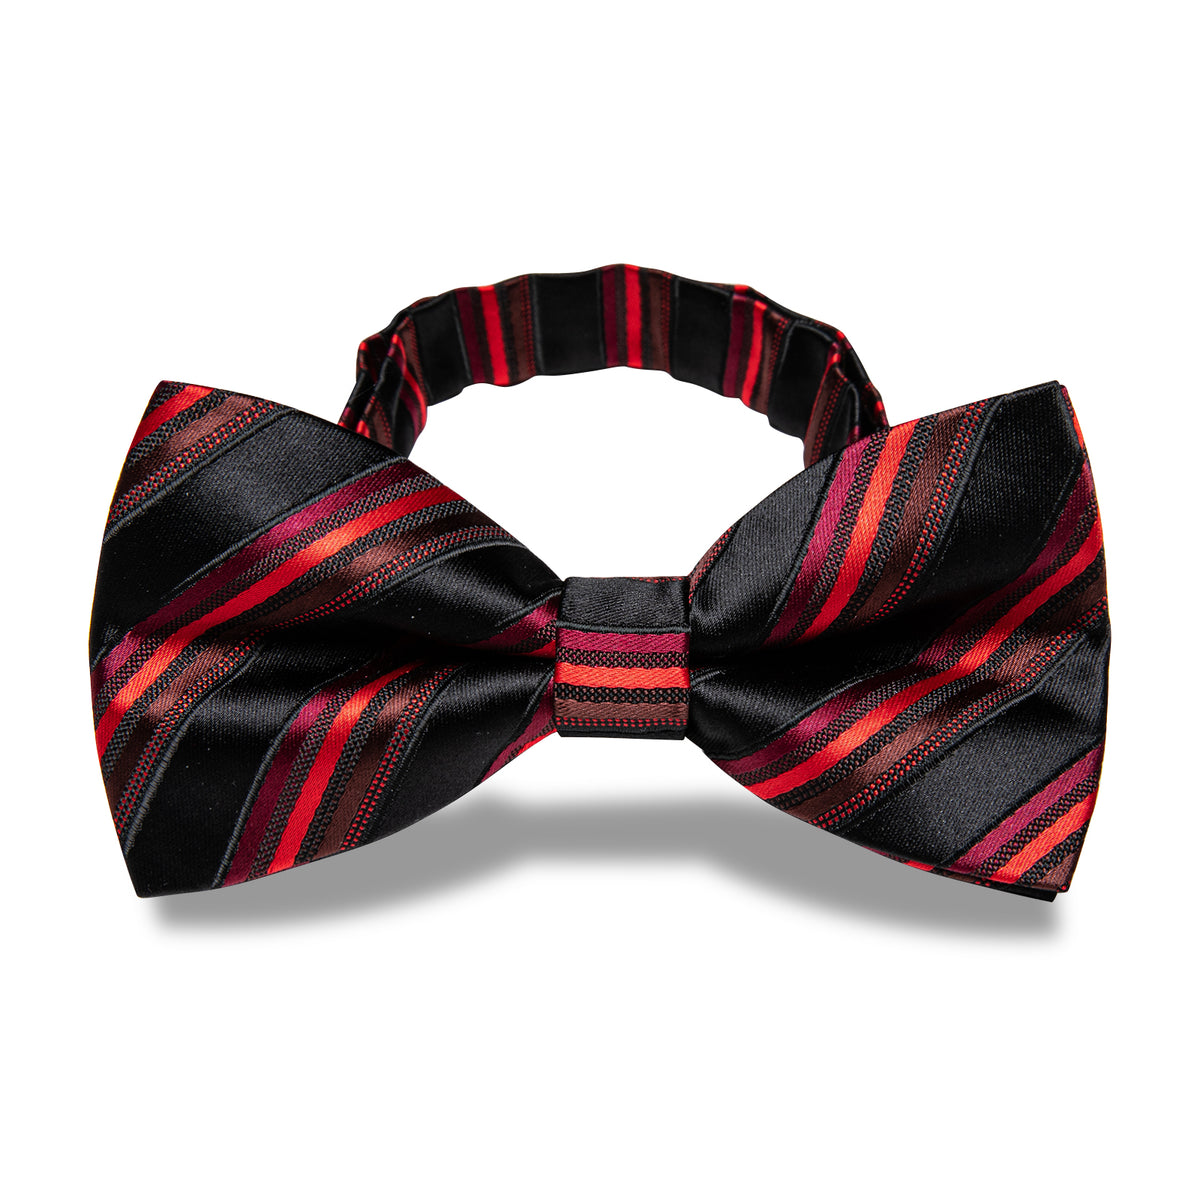 Bow tie sset cheap red bow tie